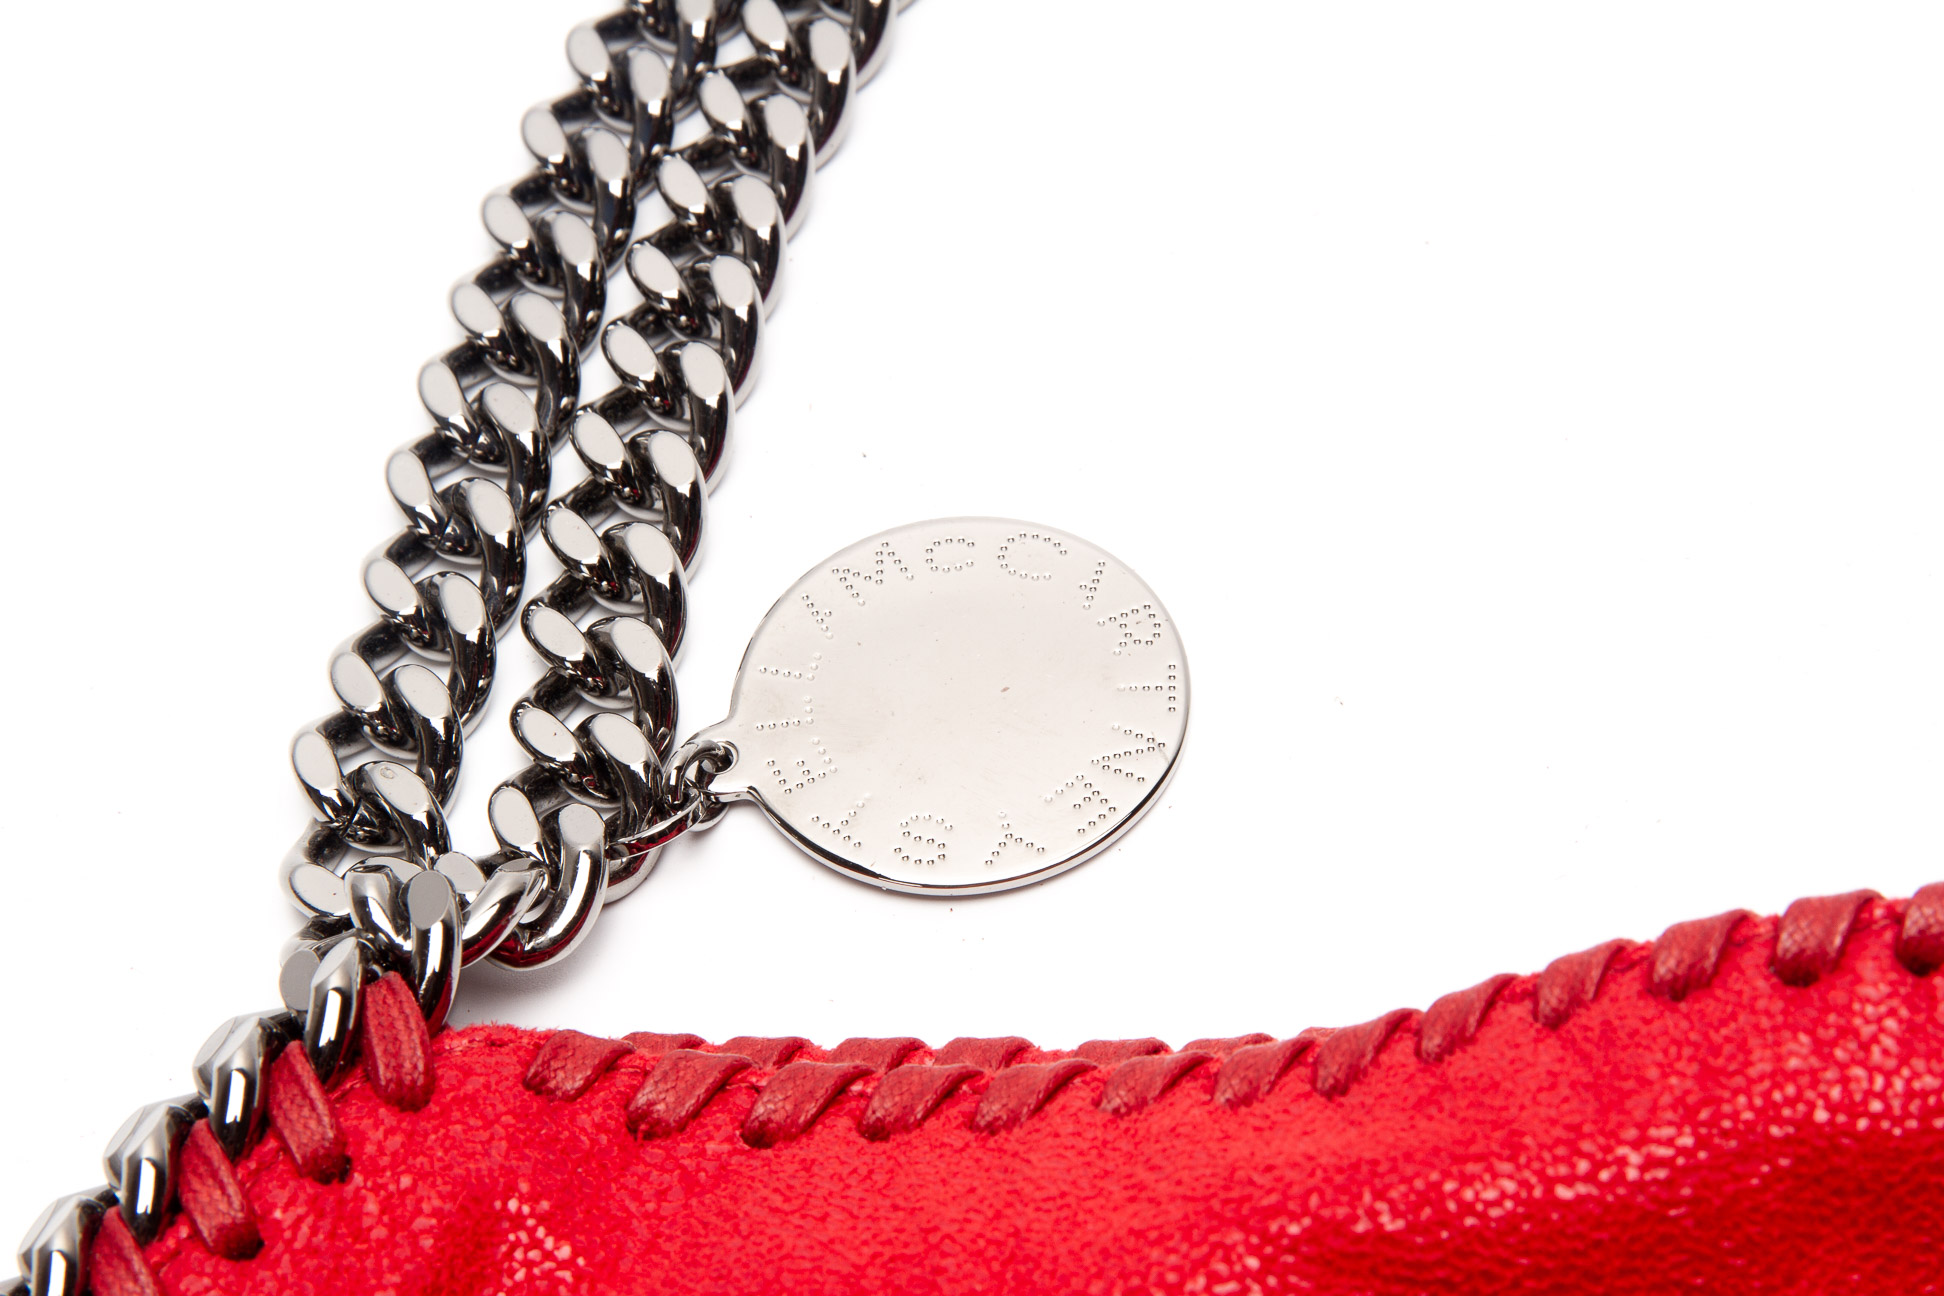 A STELLA MCCARTNEY FALABELLA CHAINED TOTE BAG - Image 5 of 5